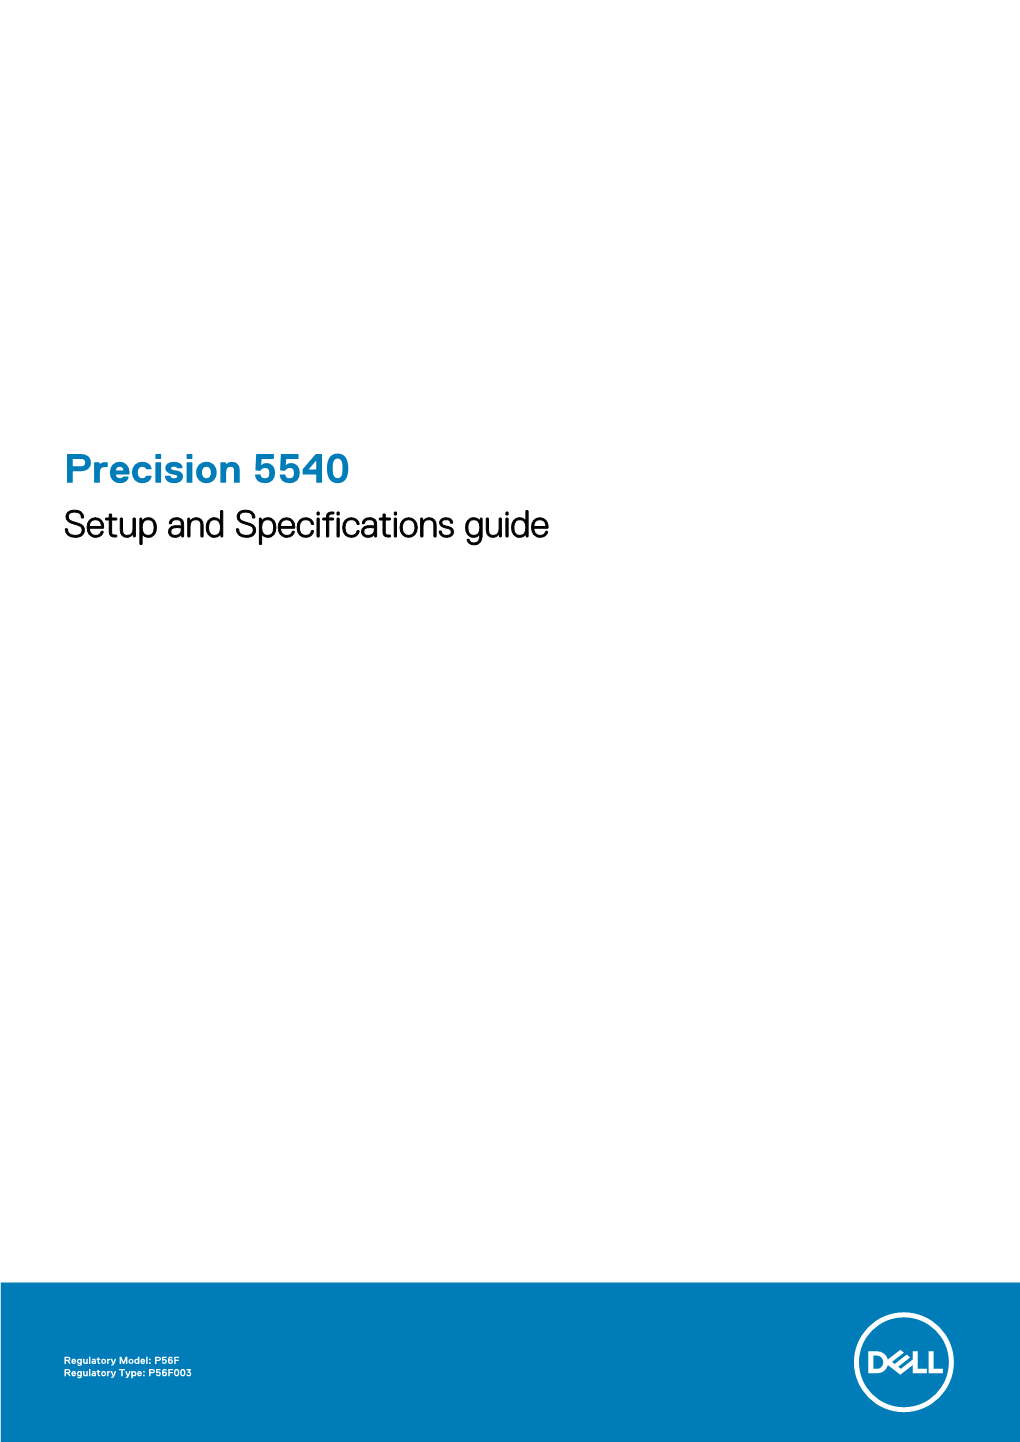 Precision 5540 Setup and Specifications Guide